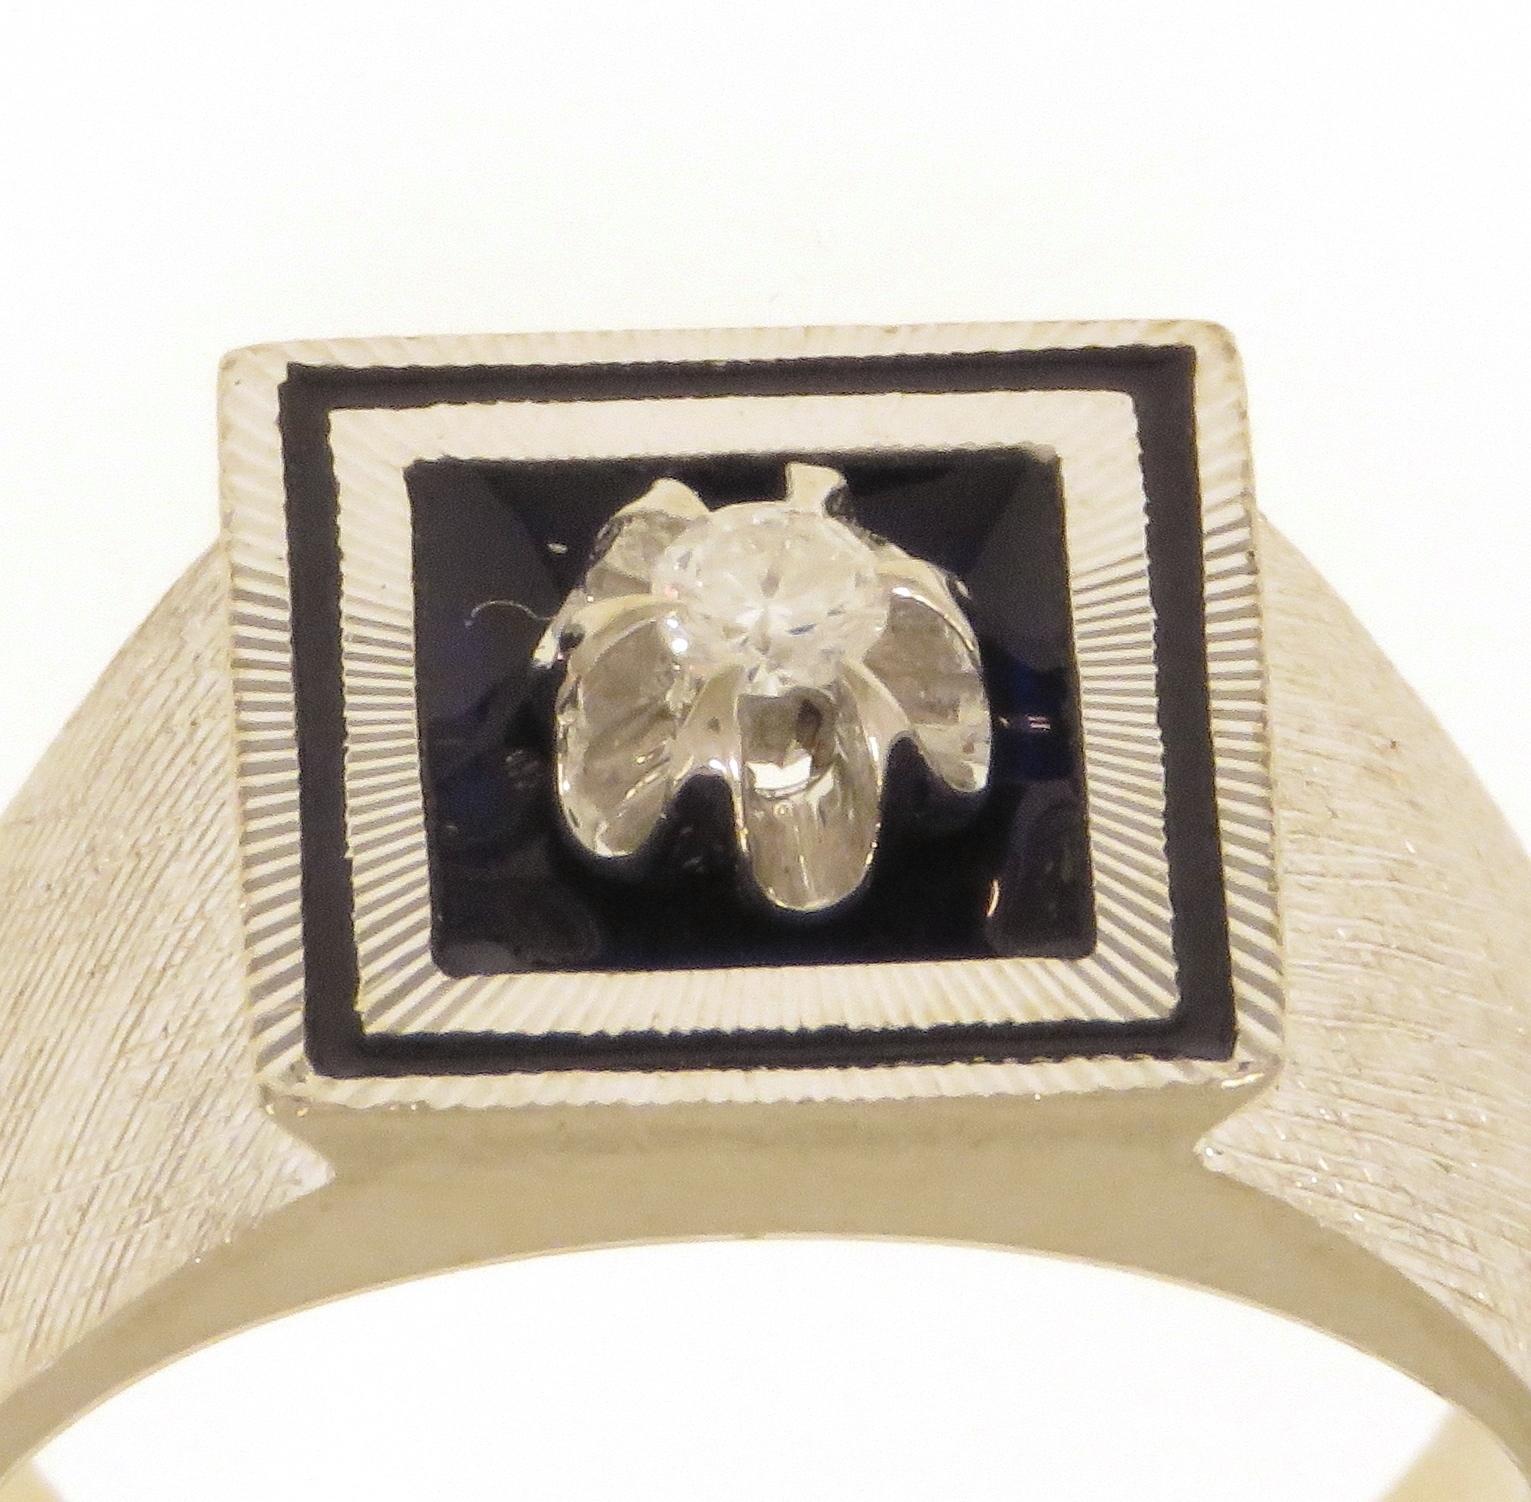 Vintage solitaire band ring handcrafted in 18k white gold. A double square frame in the centre surrounds a brillant cut diamond, embellished by delicated blue enamel. Marked with the gold mark 750 and the manufacturer mark from Arezzo